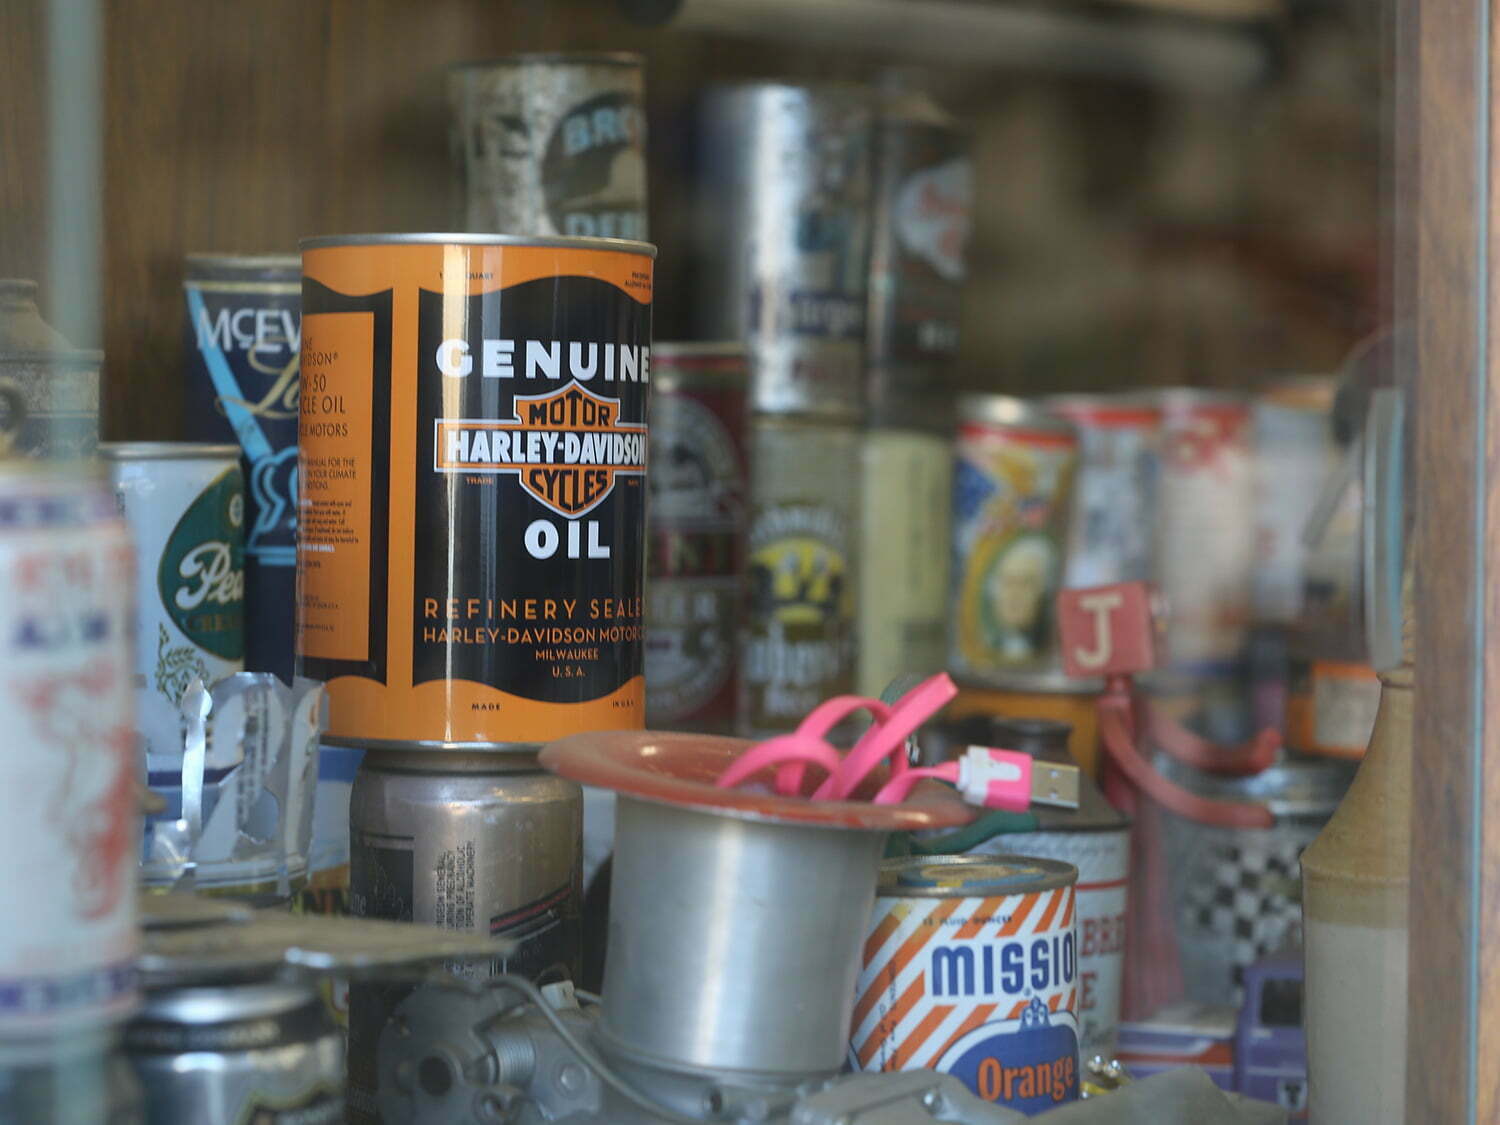 Old oil and beer cans in a display case